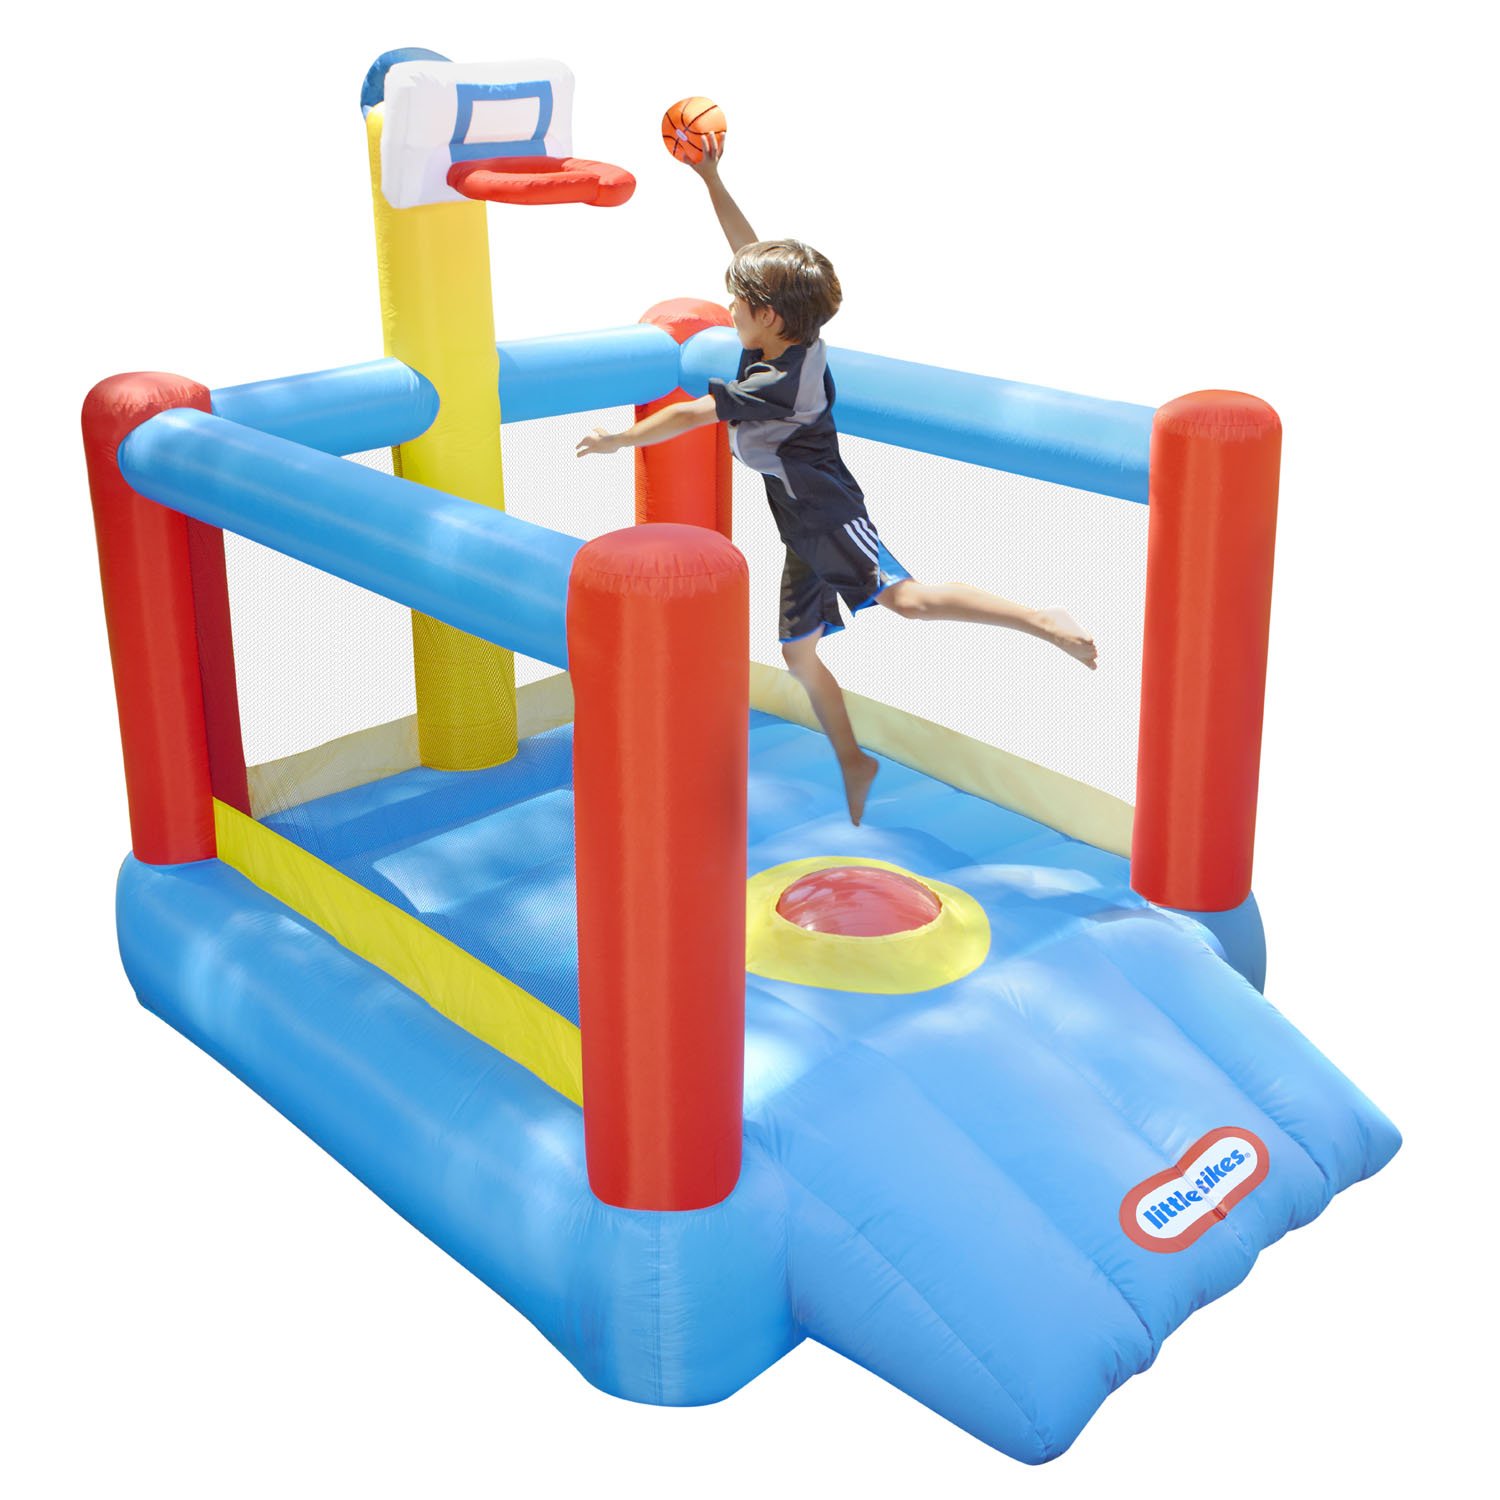 Little Tikes Super Slam 'N Dunk Inflatable Sports Bouncer with Inflatable Basketball Hoop & Blower, Multicolor, Outdoor Toy Kids Girls Boys Ages 3 4 5+ - image 1 of 6